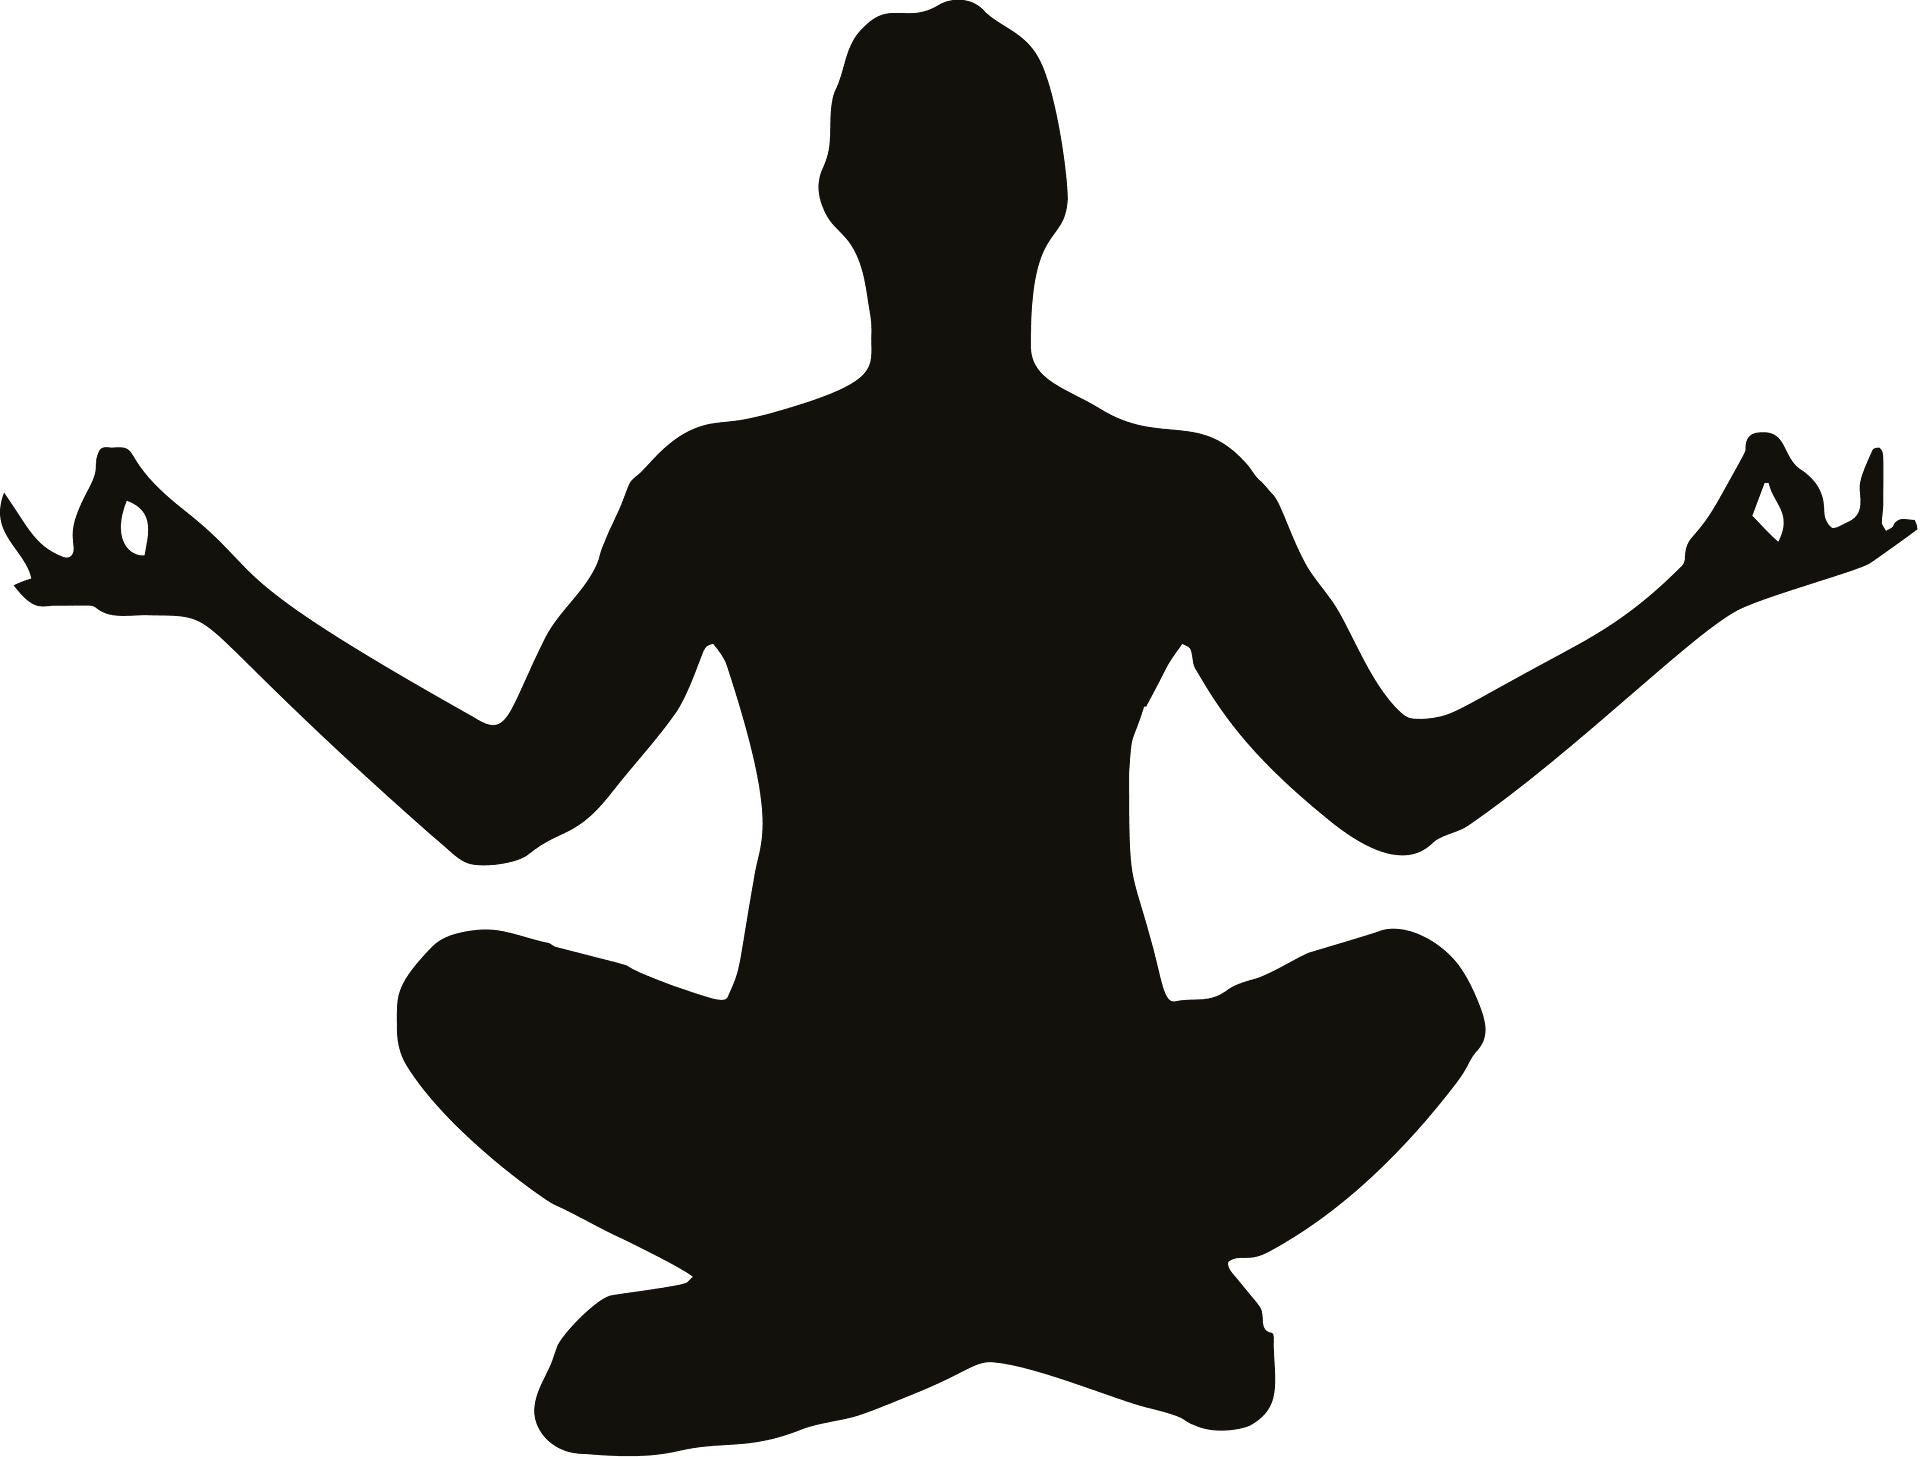 Free Download Silhouette Yoga Poses Png Clipart Yoga - Yoga Poses  Transparent Background Transparent PNG - 4320x4320 - Free Download on  NicePNG